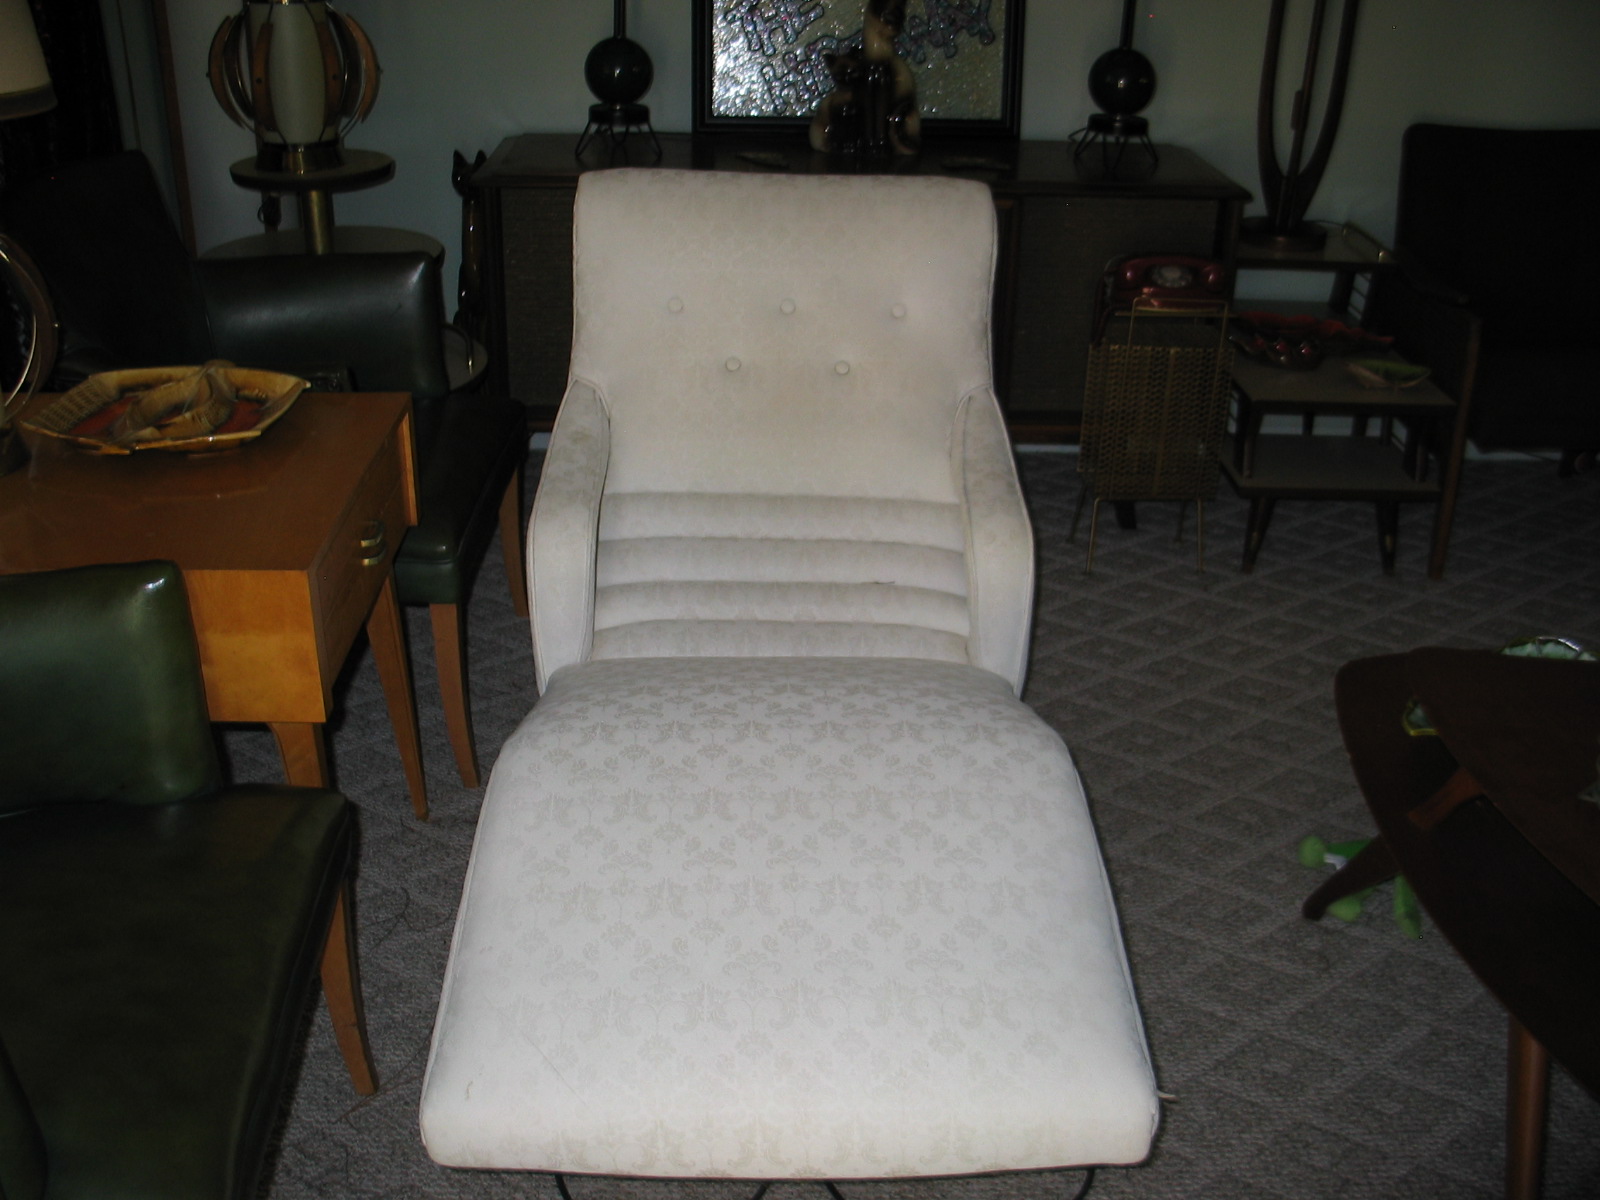 Dave's Mid Century Stuff: Let's Identify: This Contour Chair-Lounge